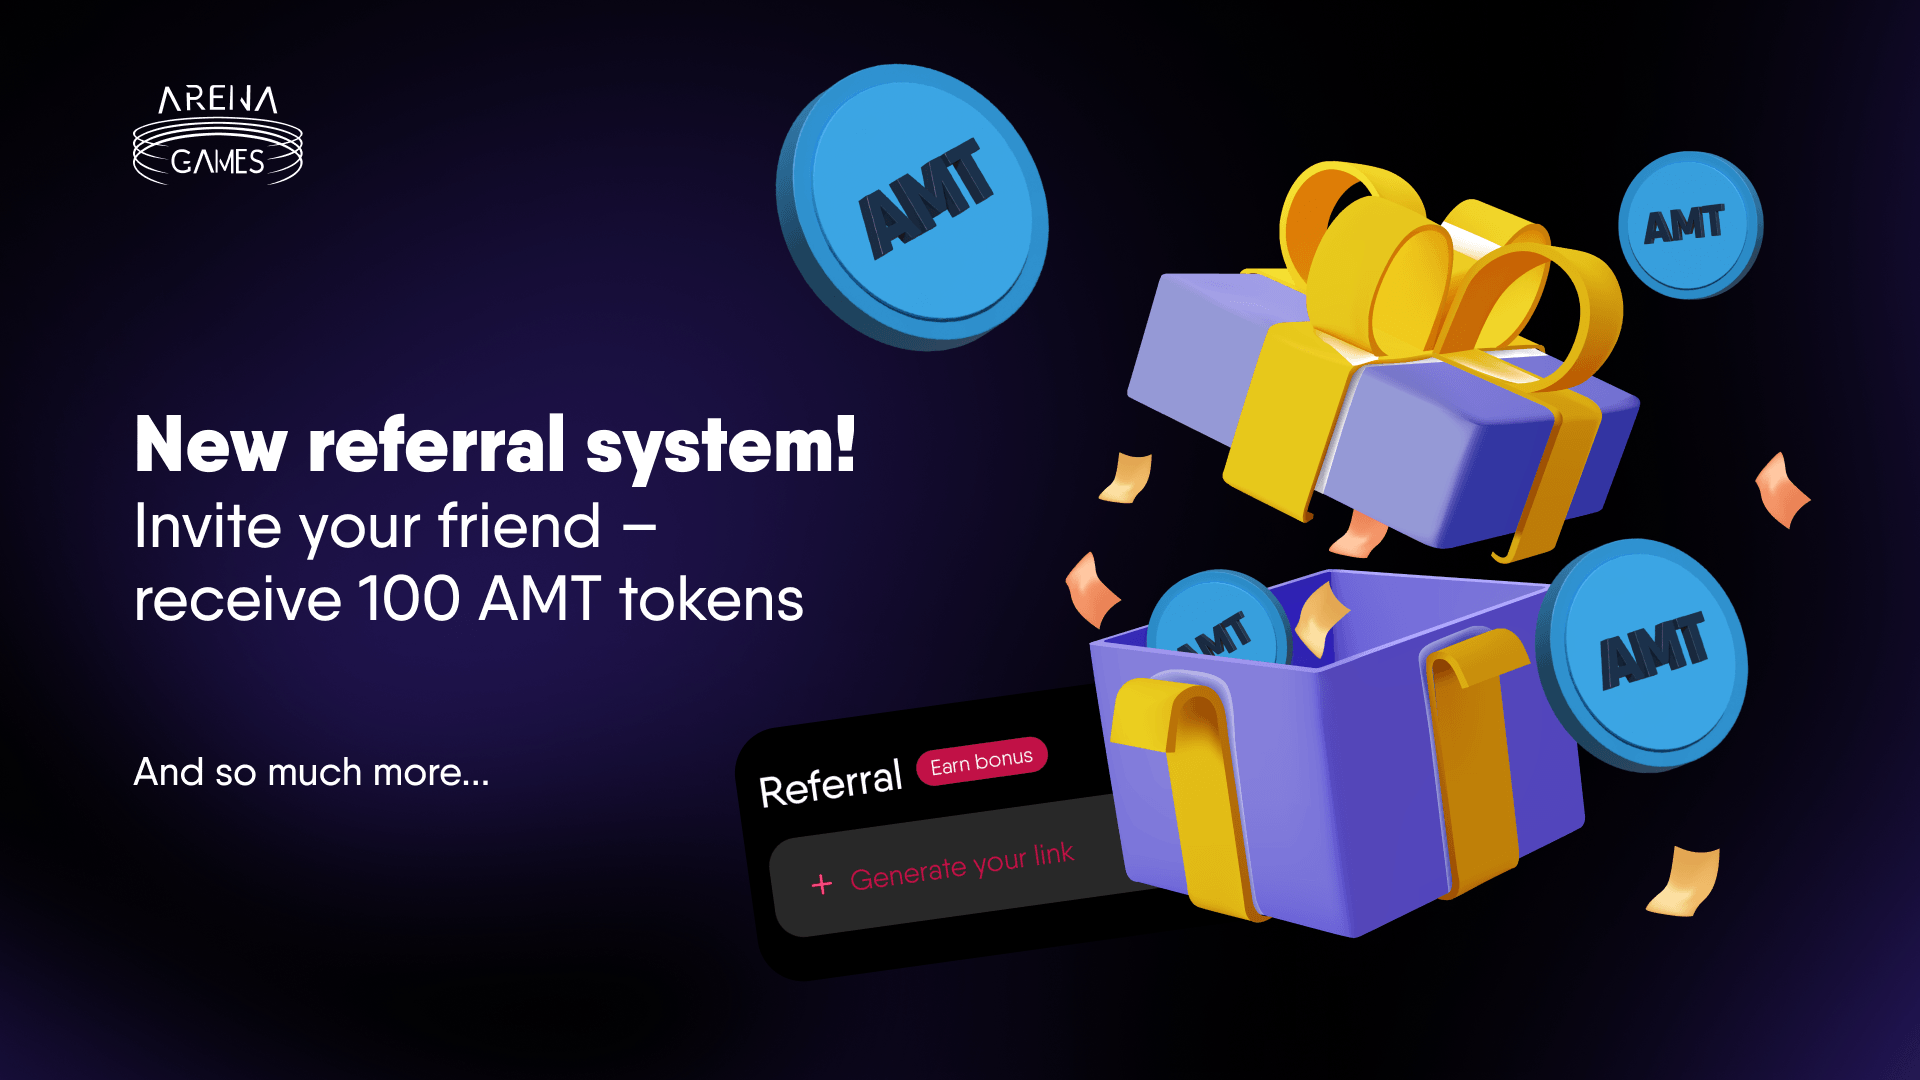 Arena Games Referral Program: Your Pathway to Unbeatable Rewards and Real-World Gains